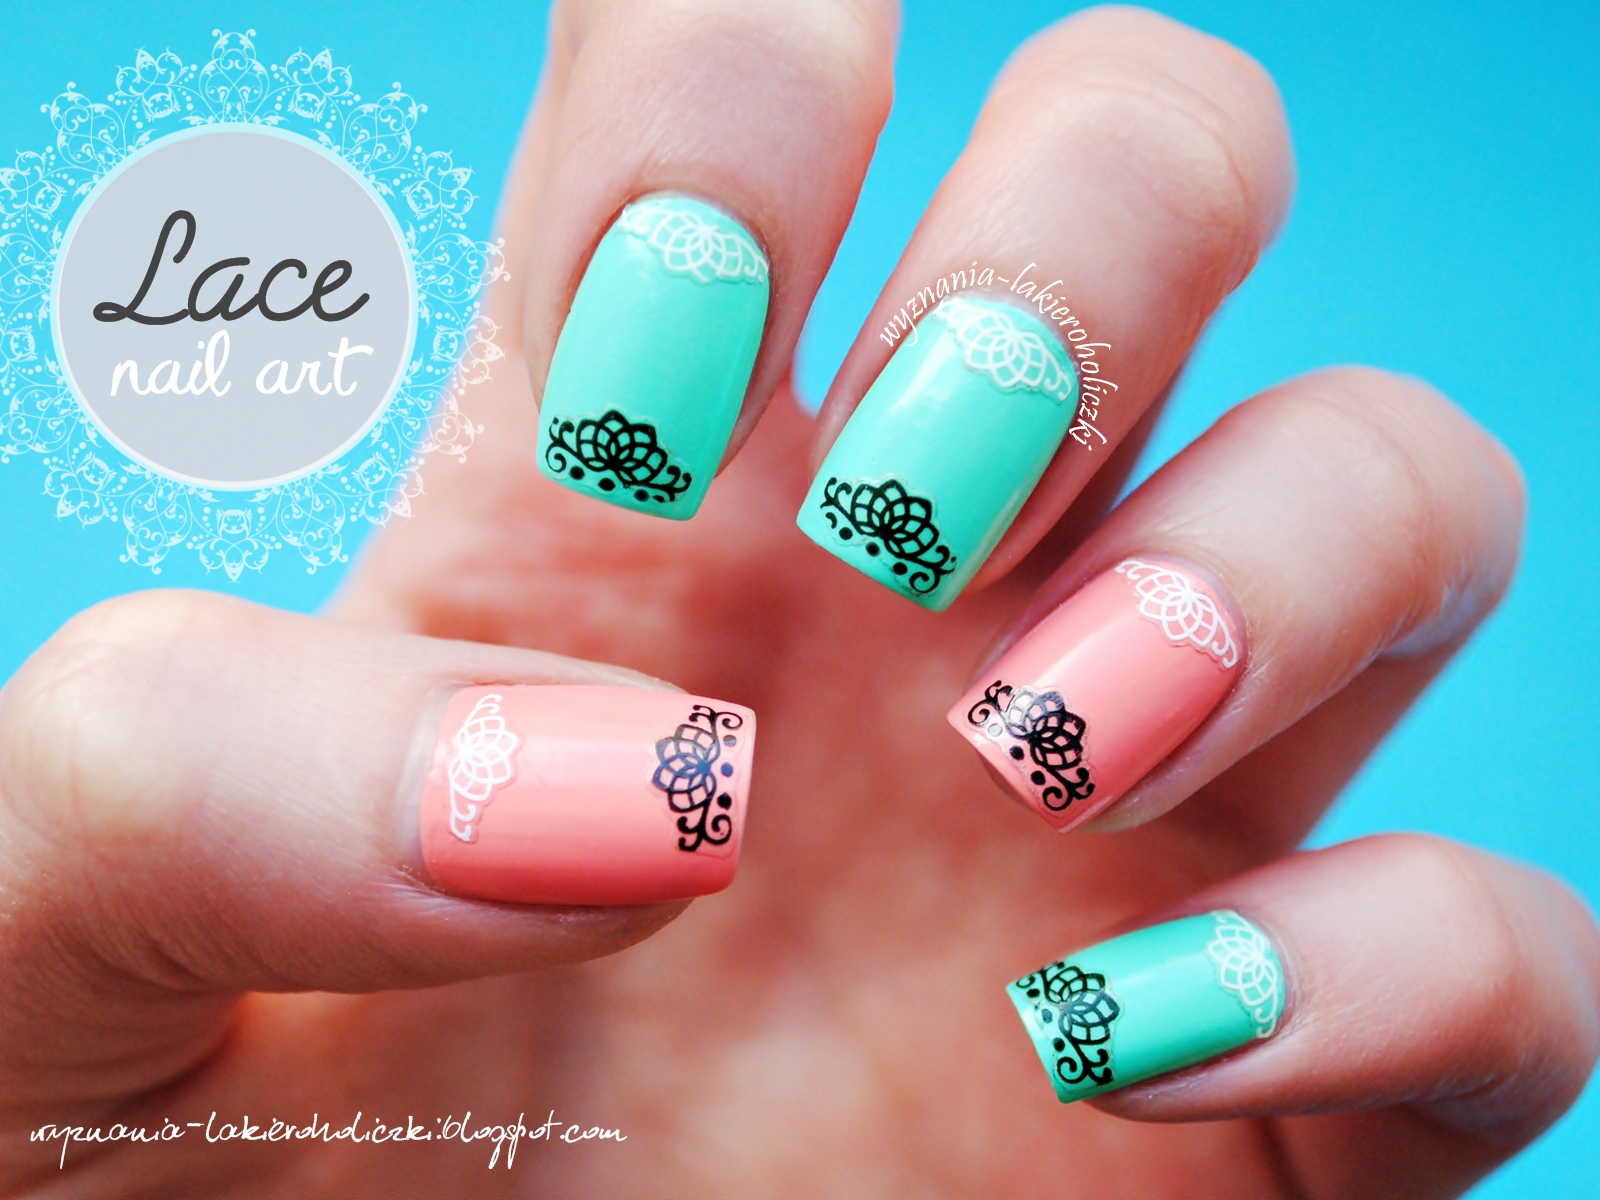 1. Easy DIY Lace Nail Art Tutorial - wide 5